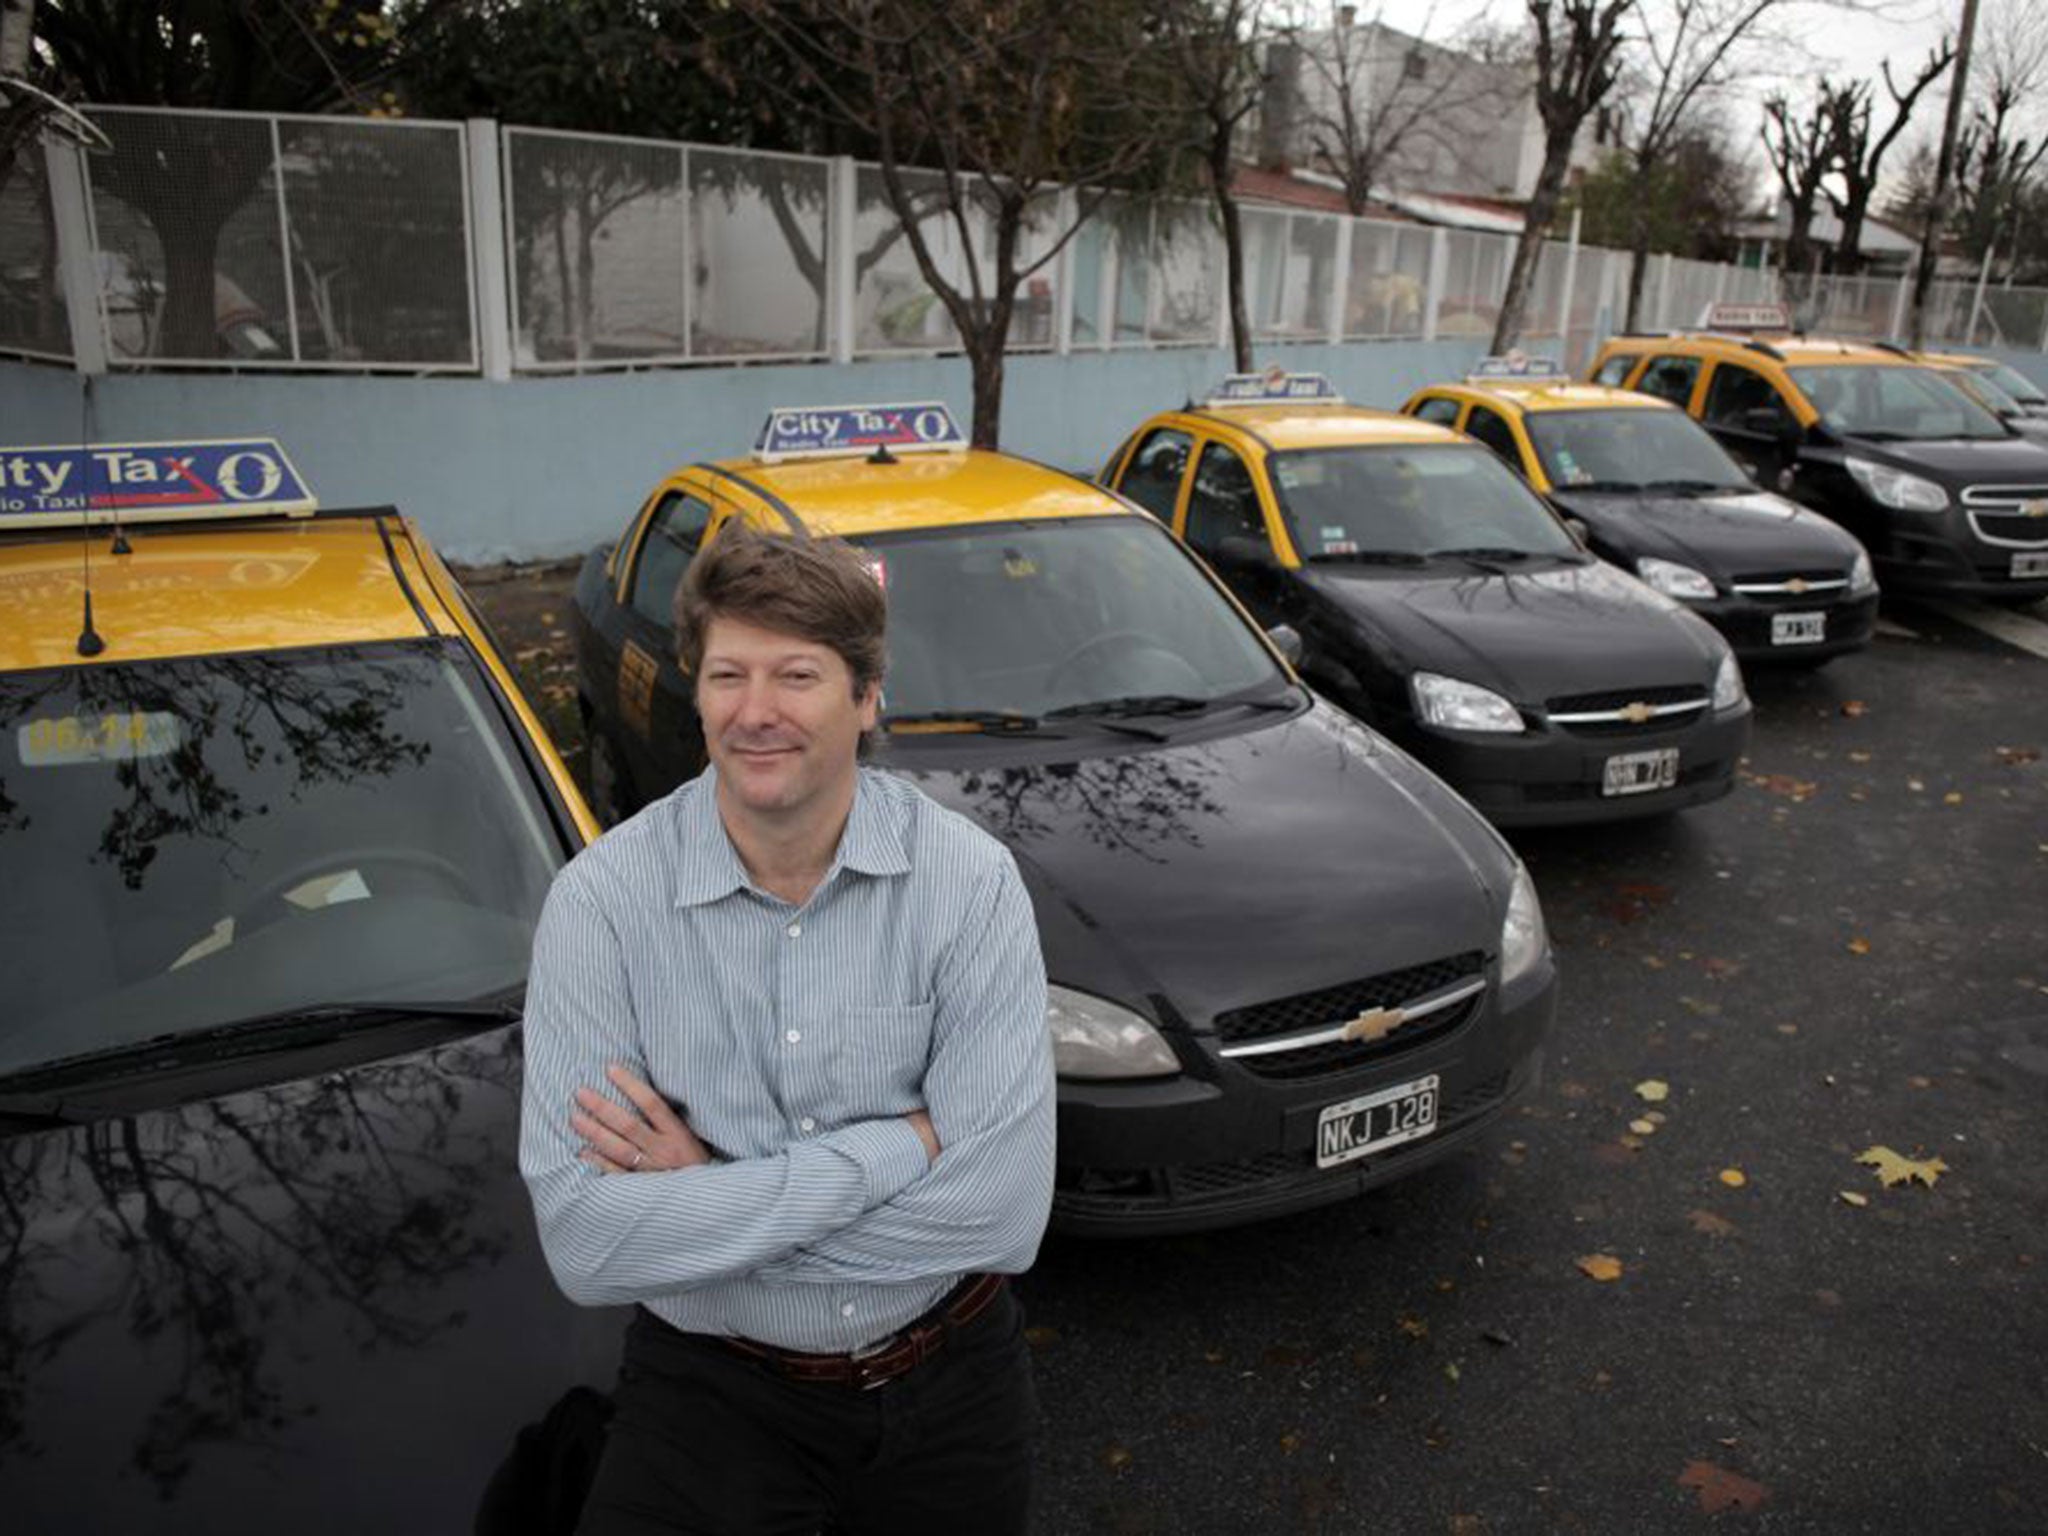 Russell Abrams, a former Goldman Sachs trader, intends to buy 1,000 more Argentinian taxi licences